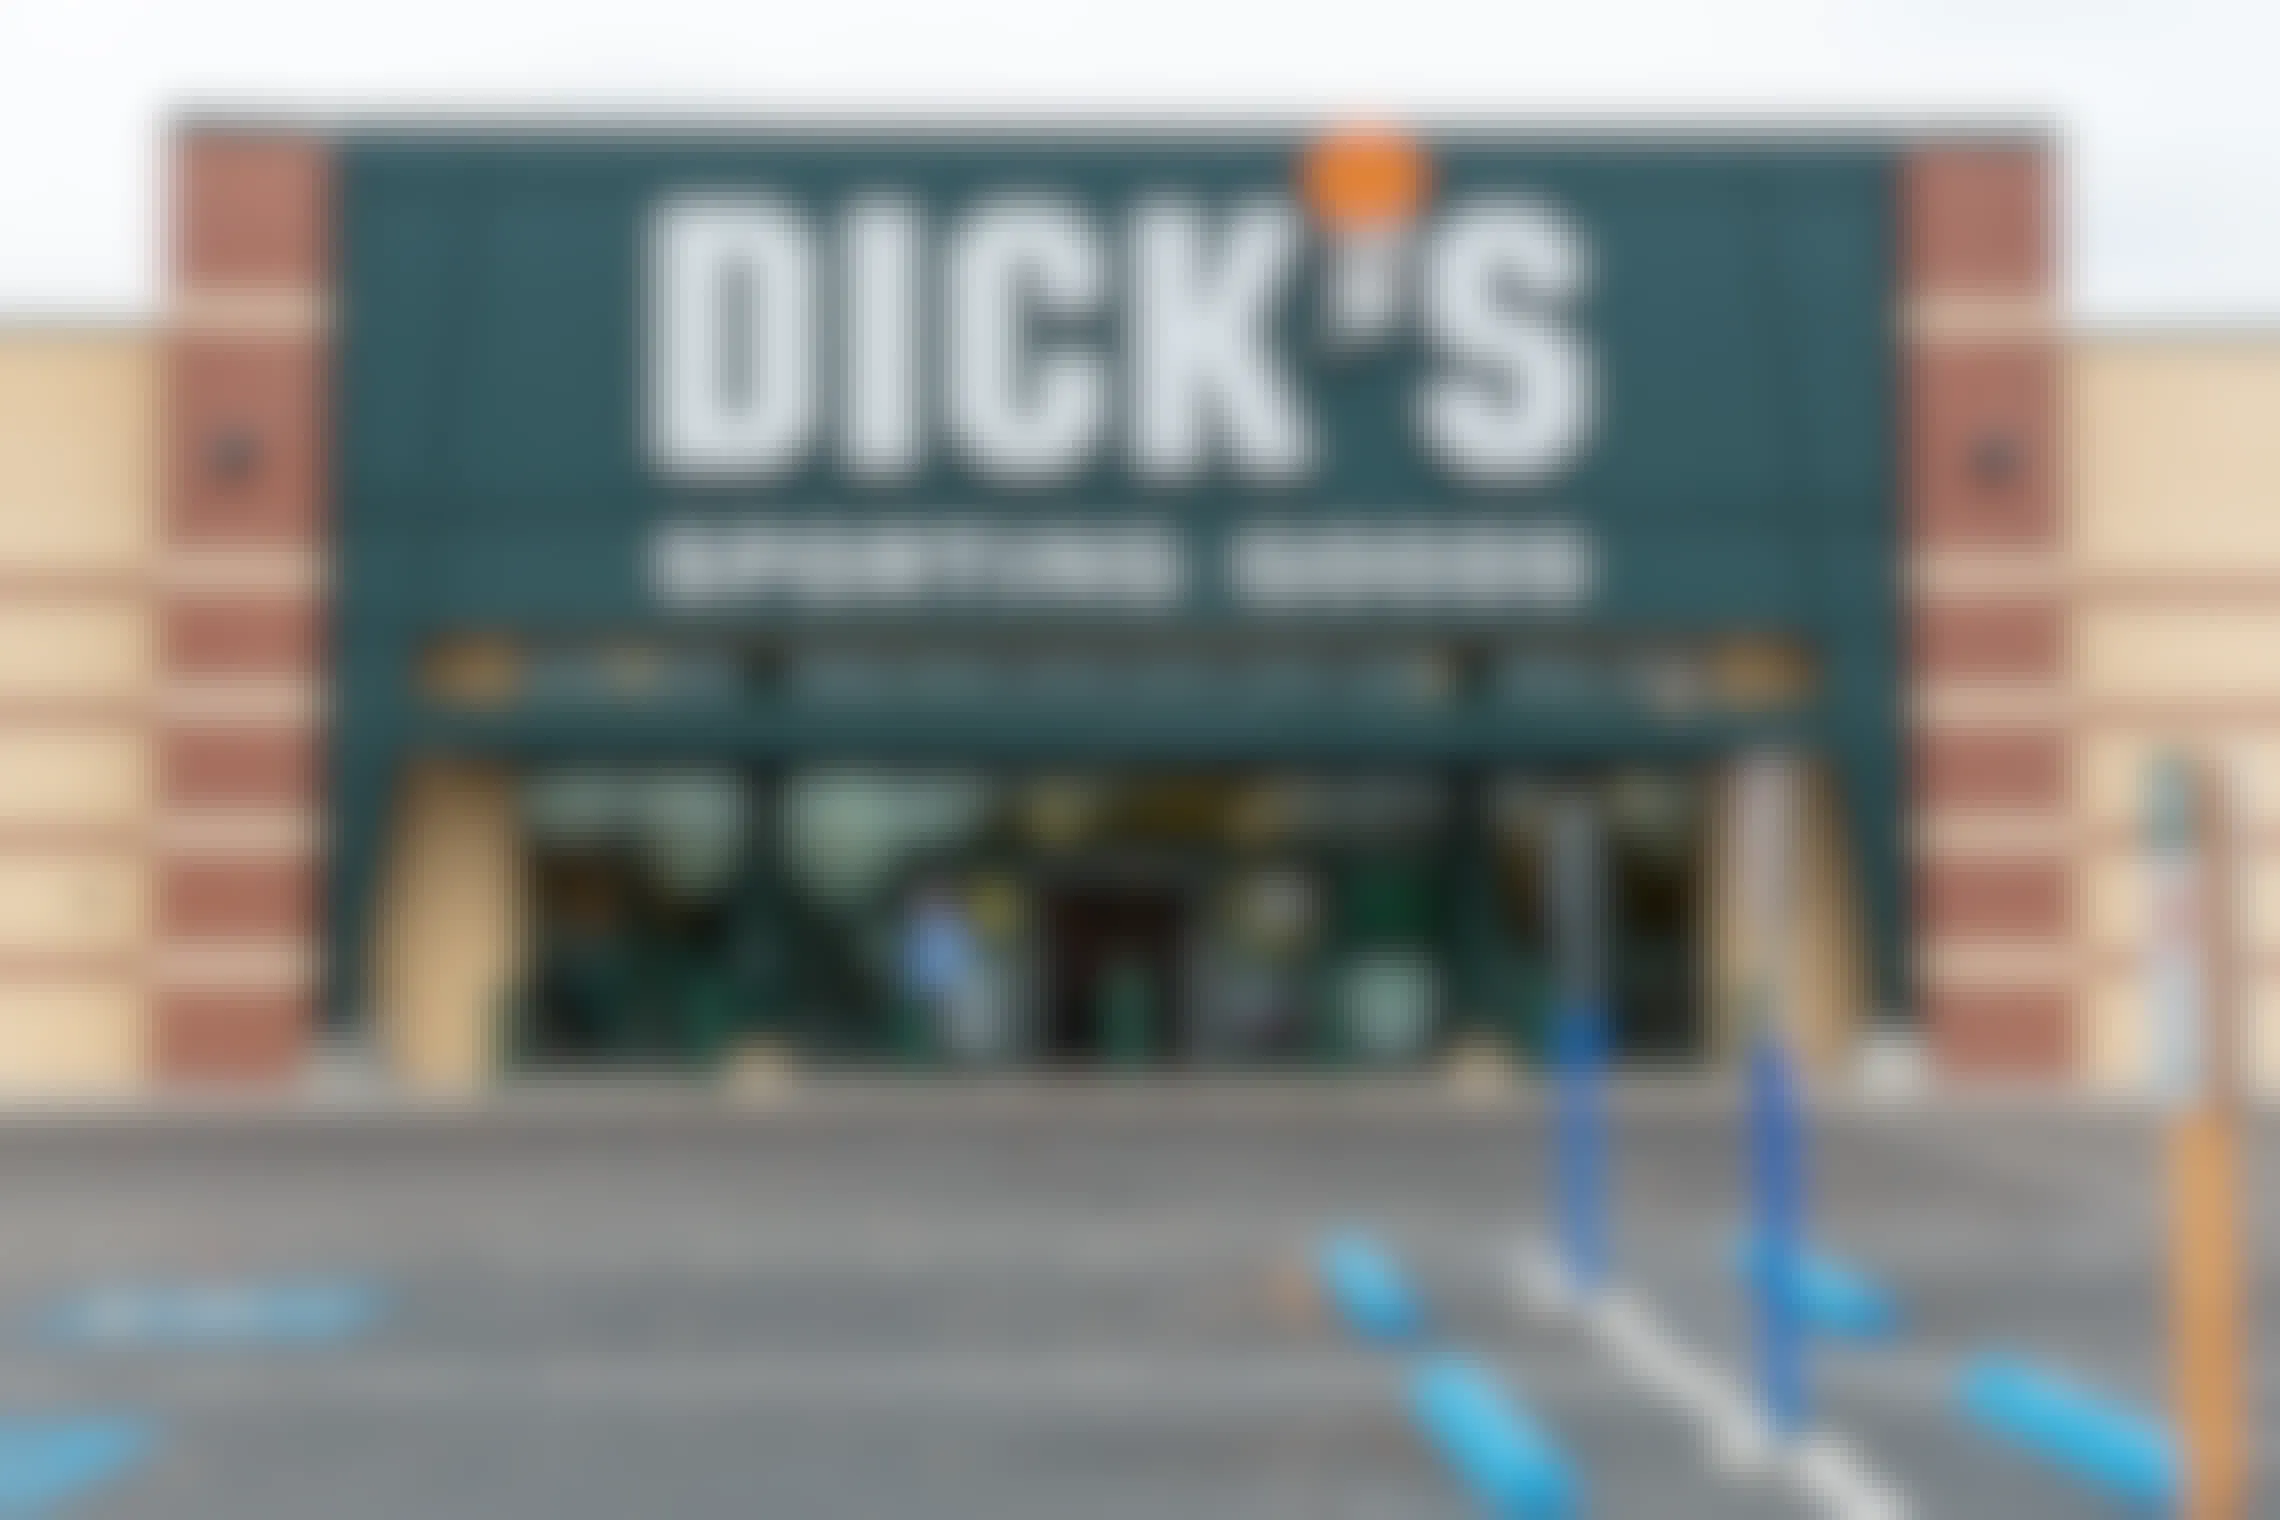 Dicks sporting goods store front